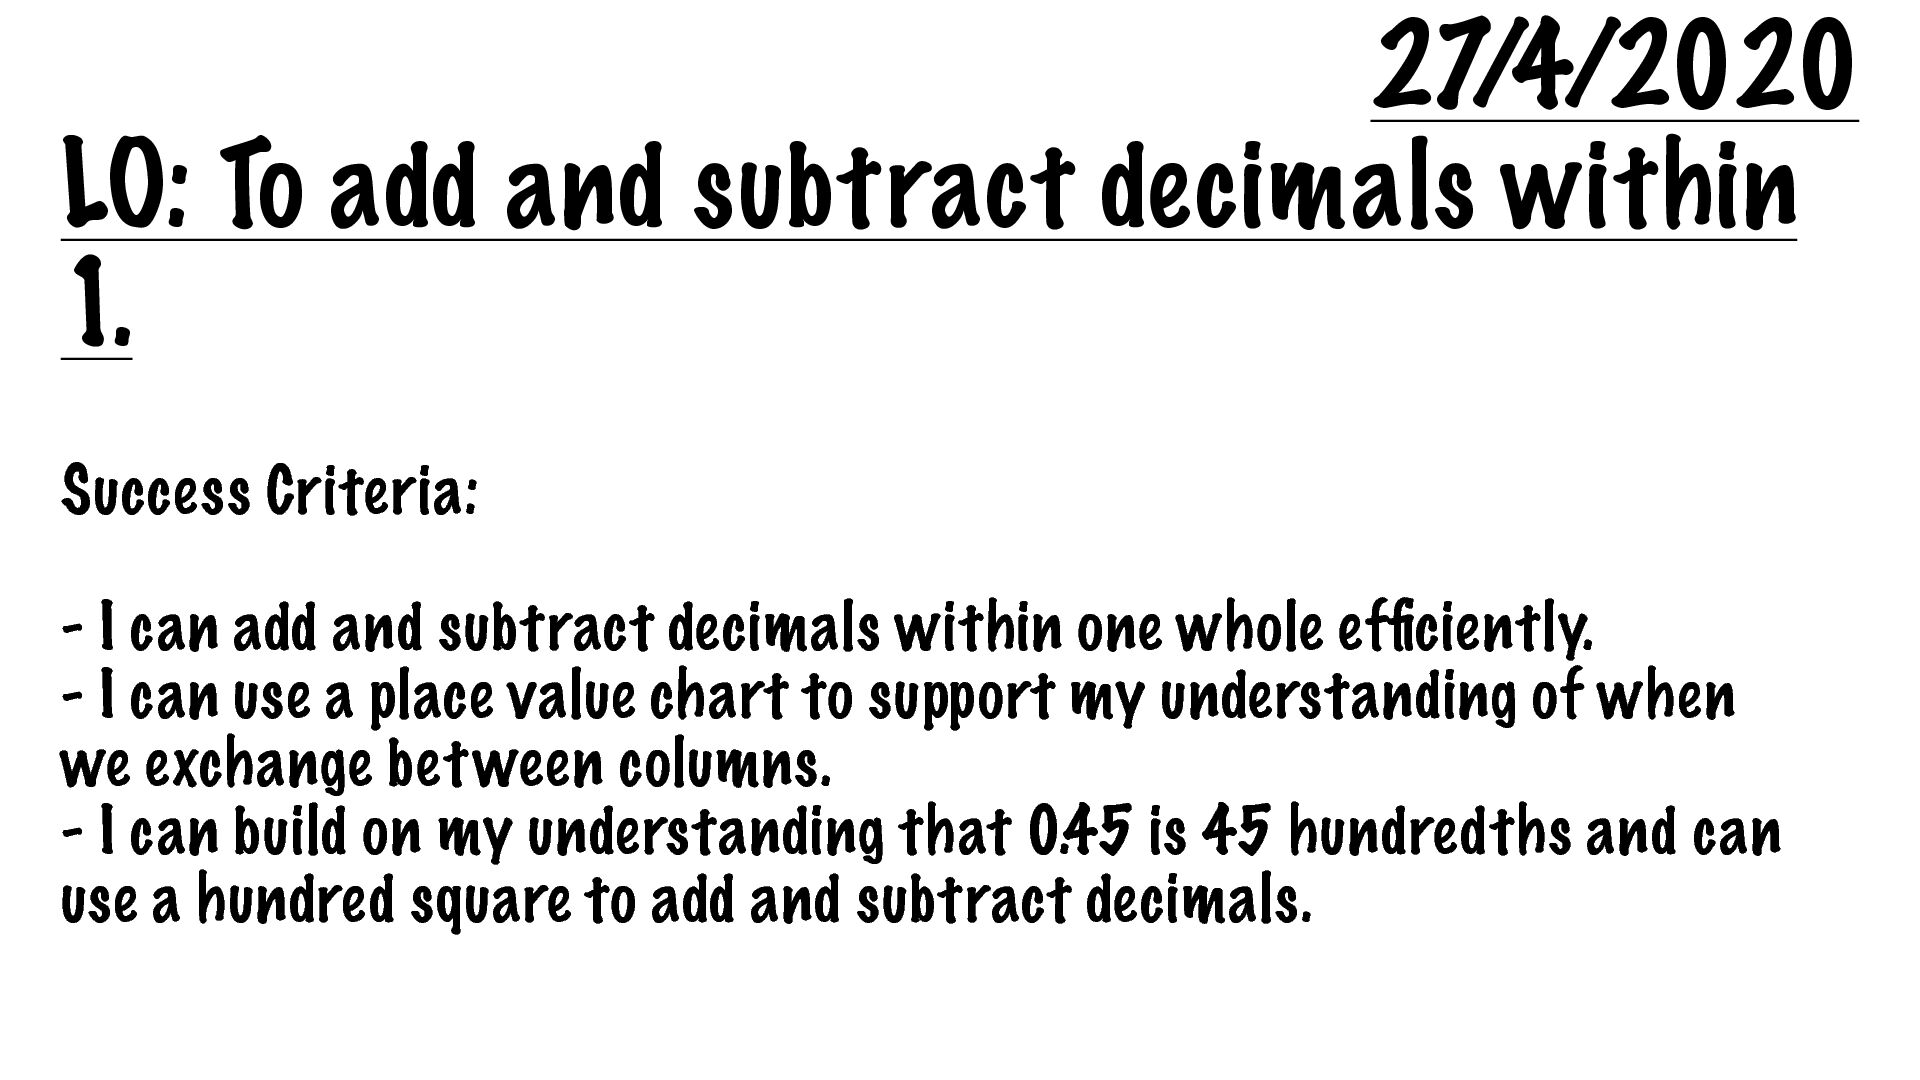 [PDF] To add and subtract decimals within 1 - Blessed Dominic